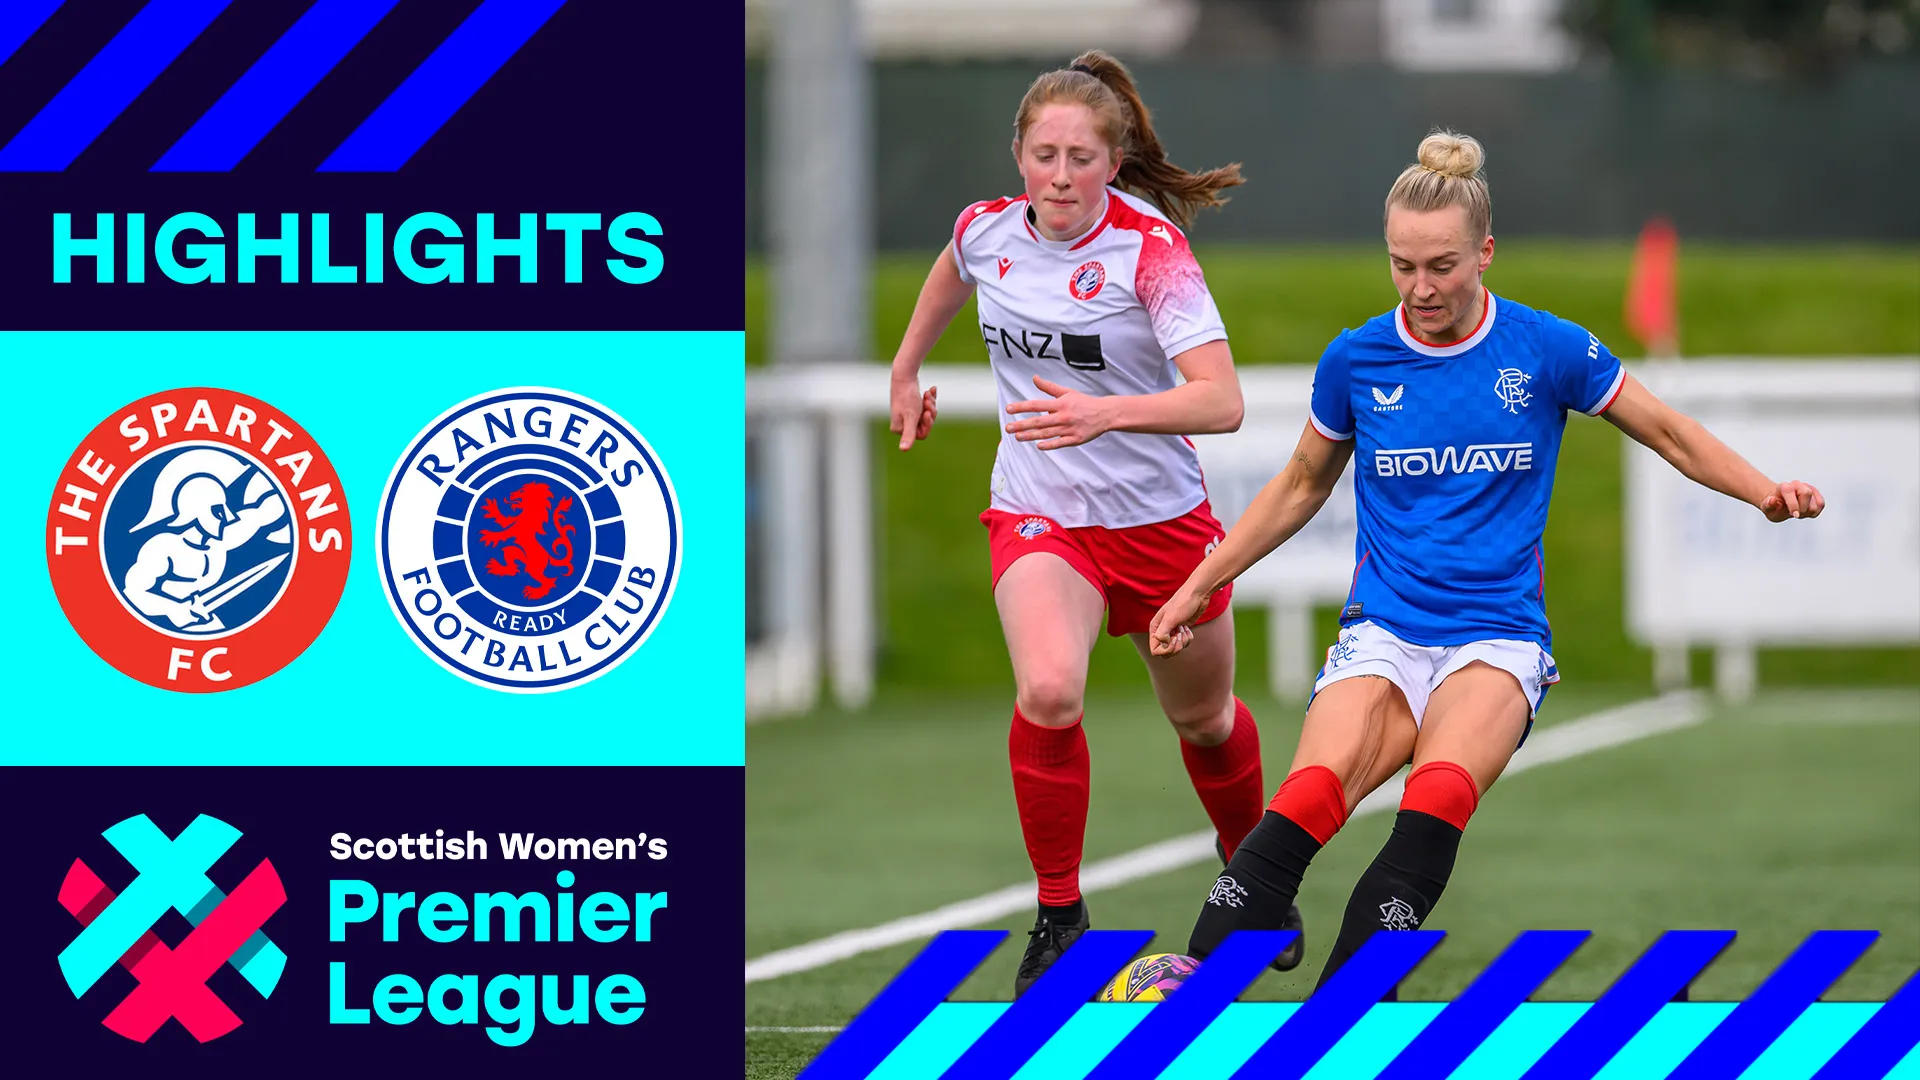 Image for Spartans 0-1 Rangers | Rangers close gap to Celtic with hard-fought win at Spartans | SWPL